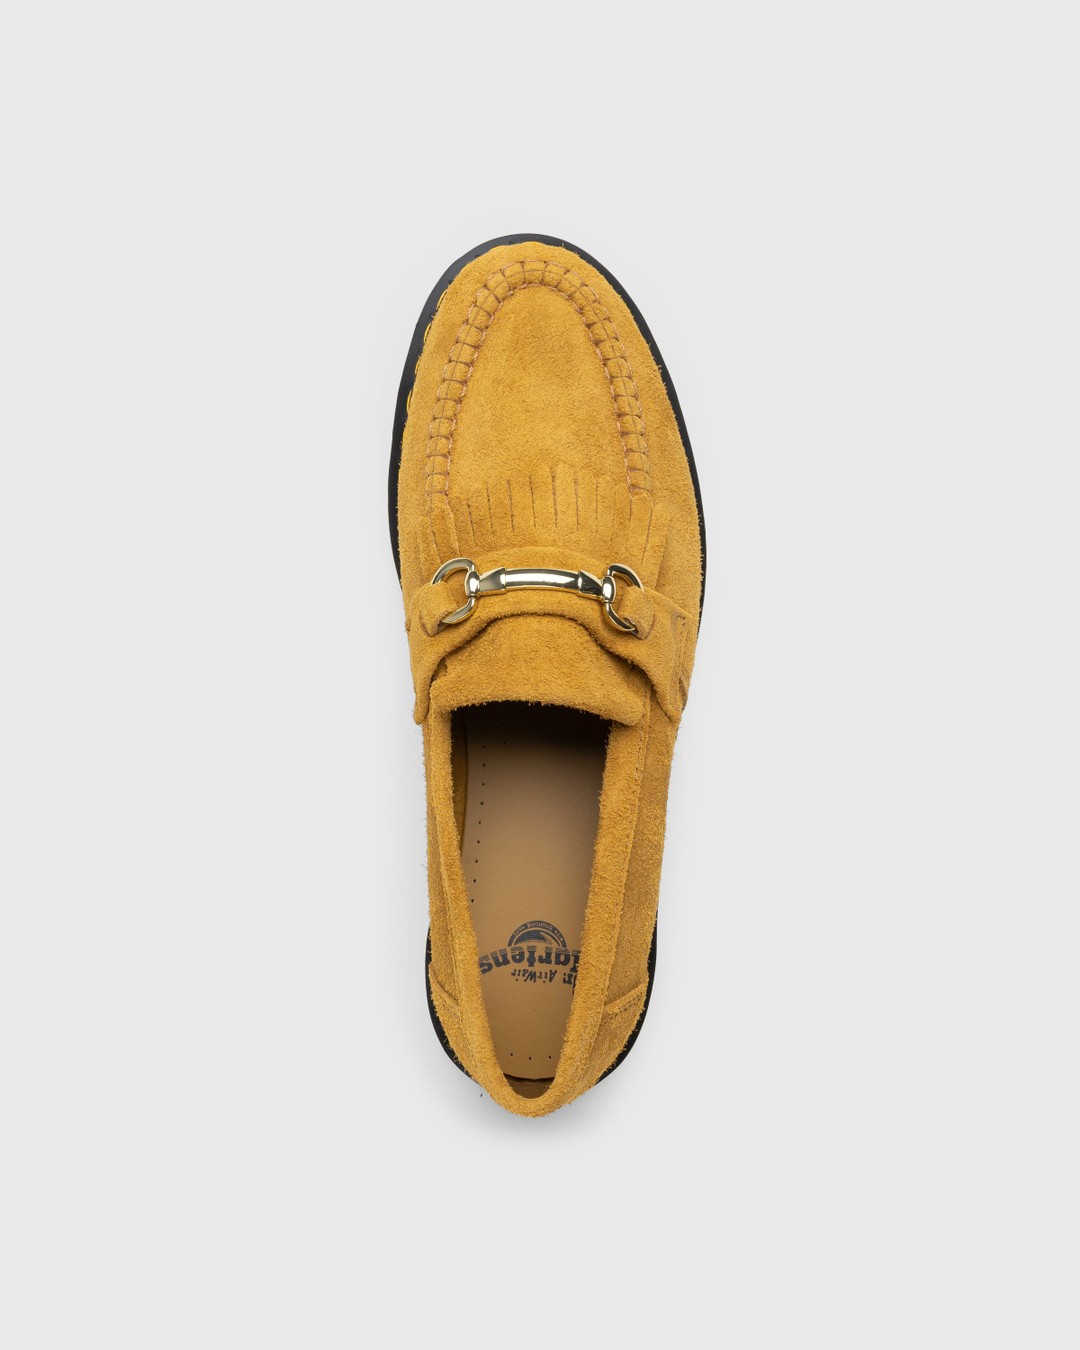 Dr. Martens – Adrian Snaffle Suede Loafers Light Tan Desert Oasis Suede (Gum Oil) - Shoes - Brown - Image 5